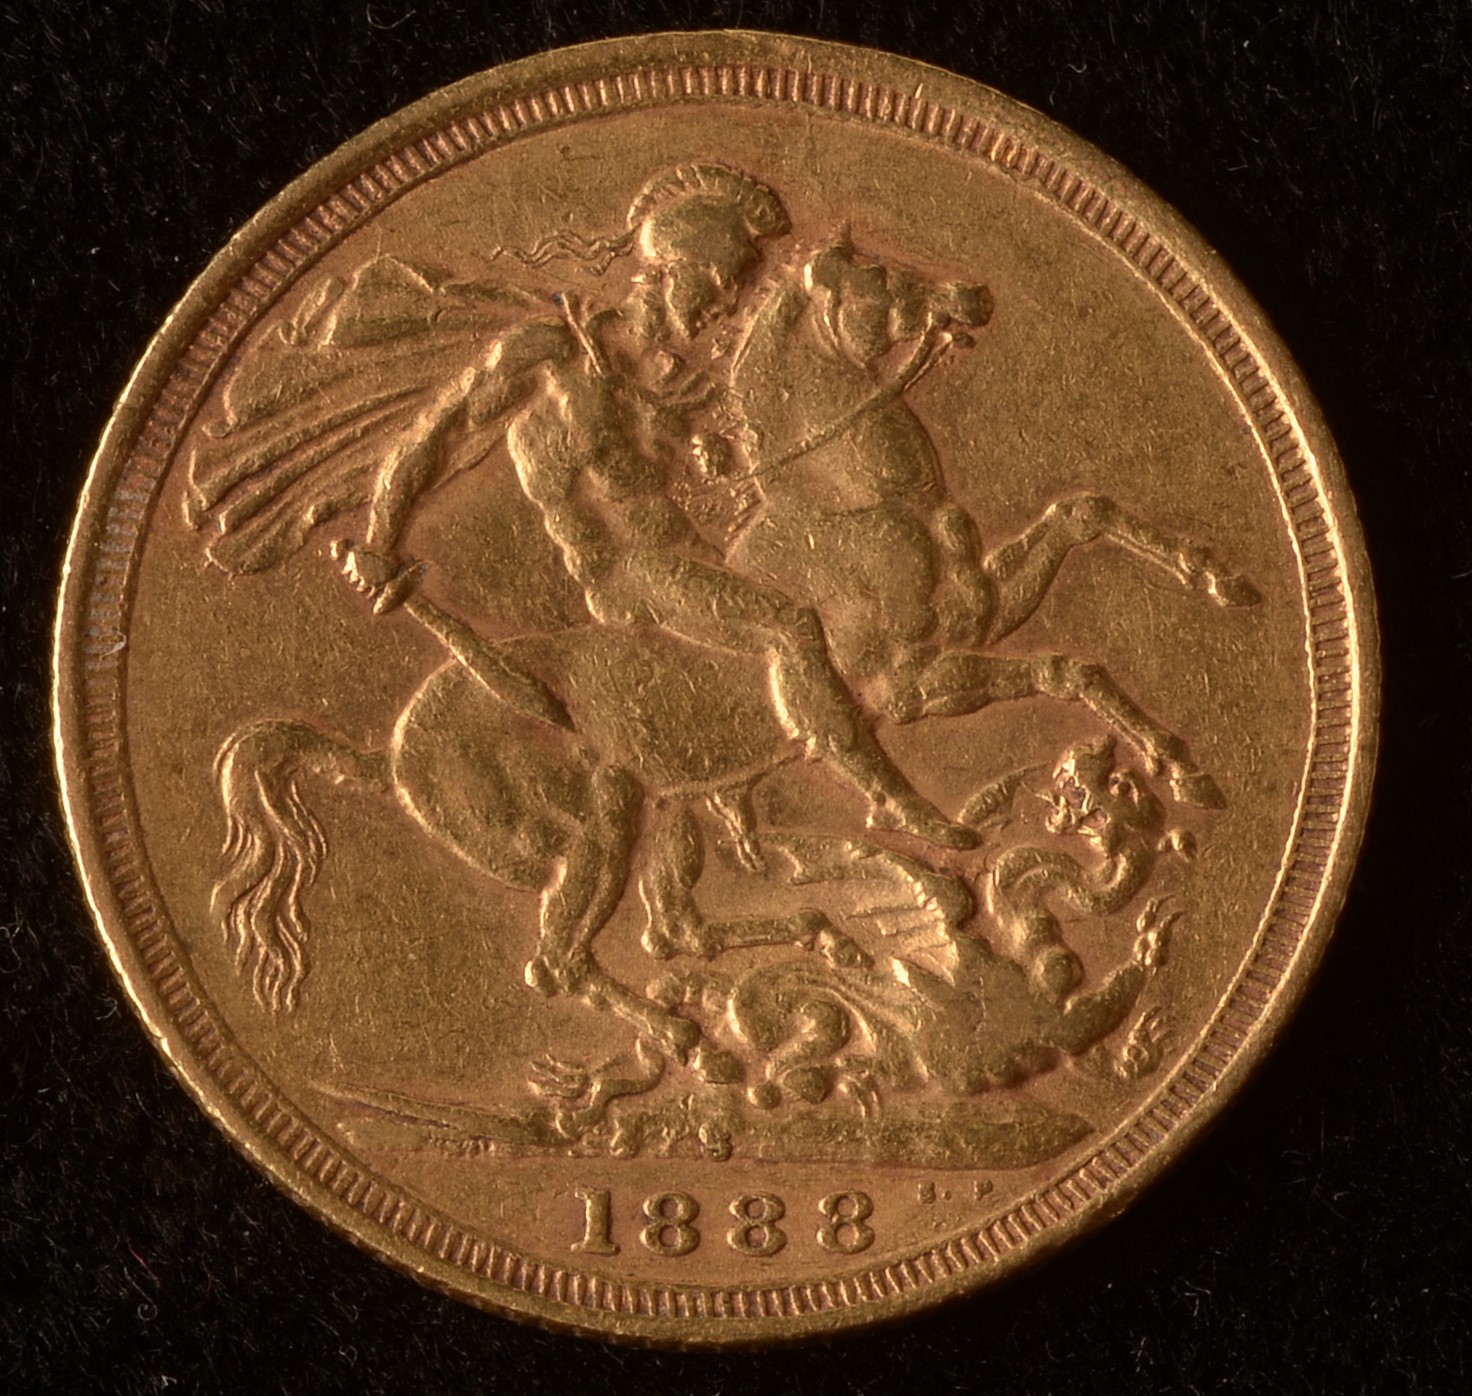 Queen Victoria gold sovereign - Image 2 of 2